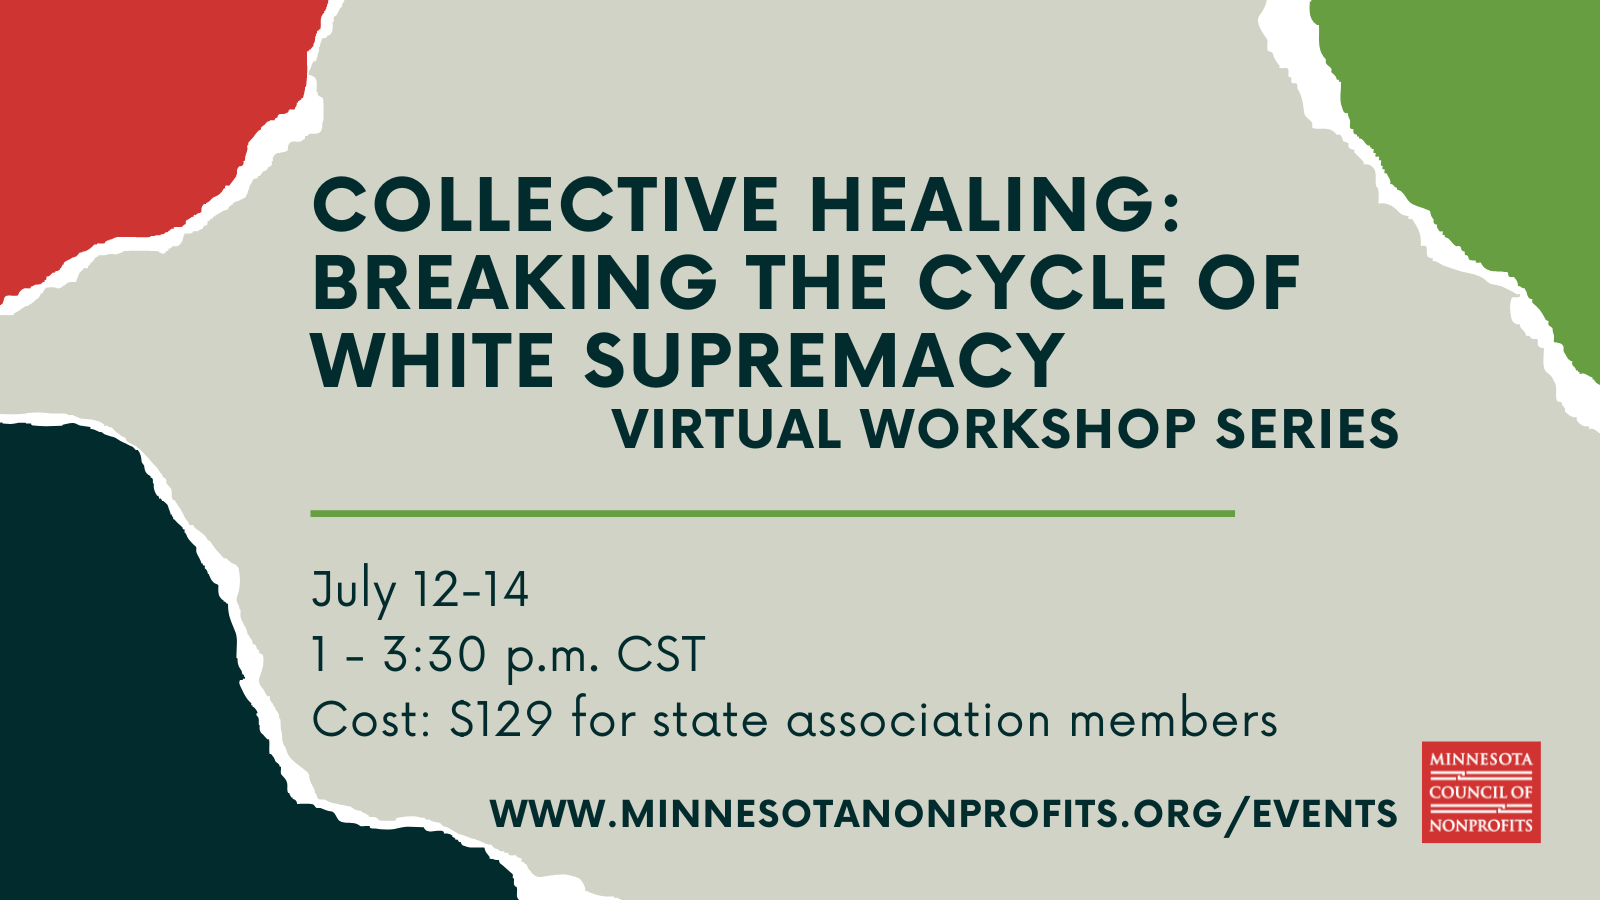 Collective Healing, Breaking the Cycle of White Supremacy Virtual Workshop